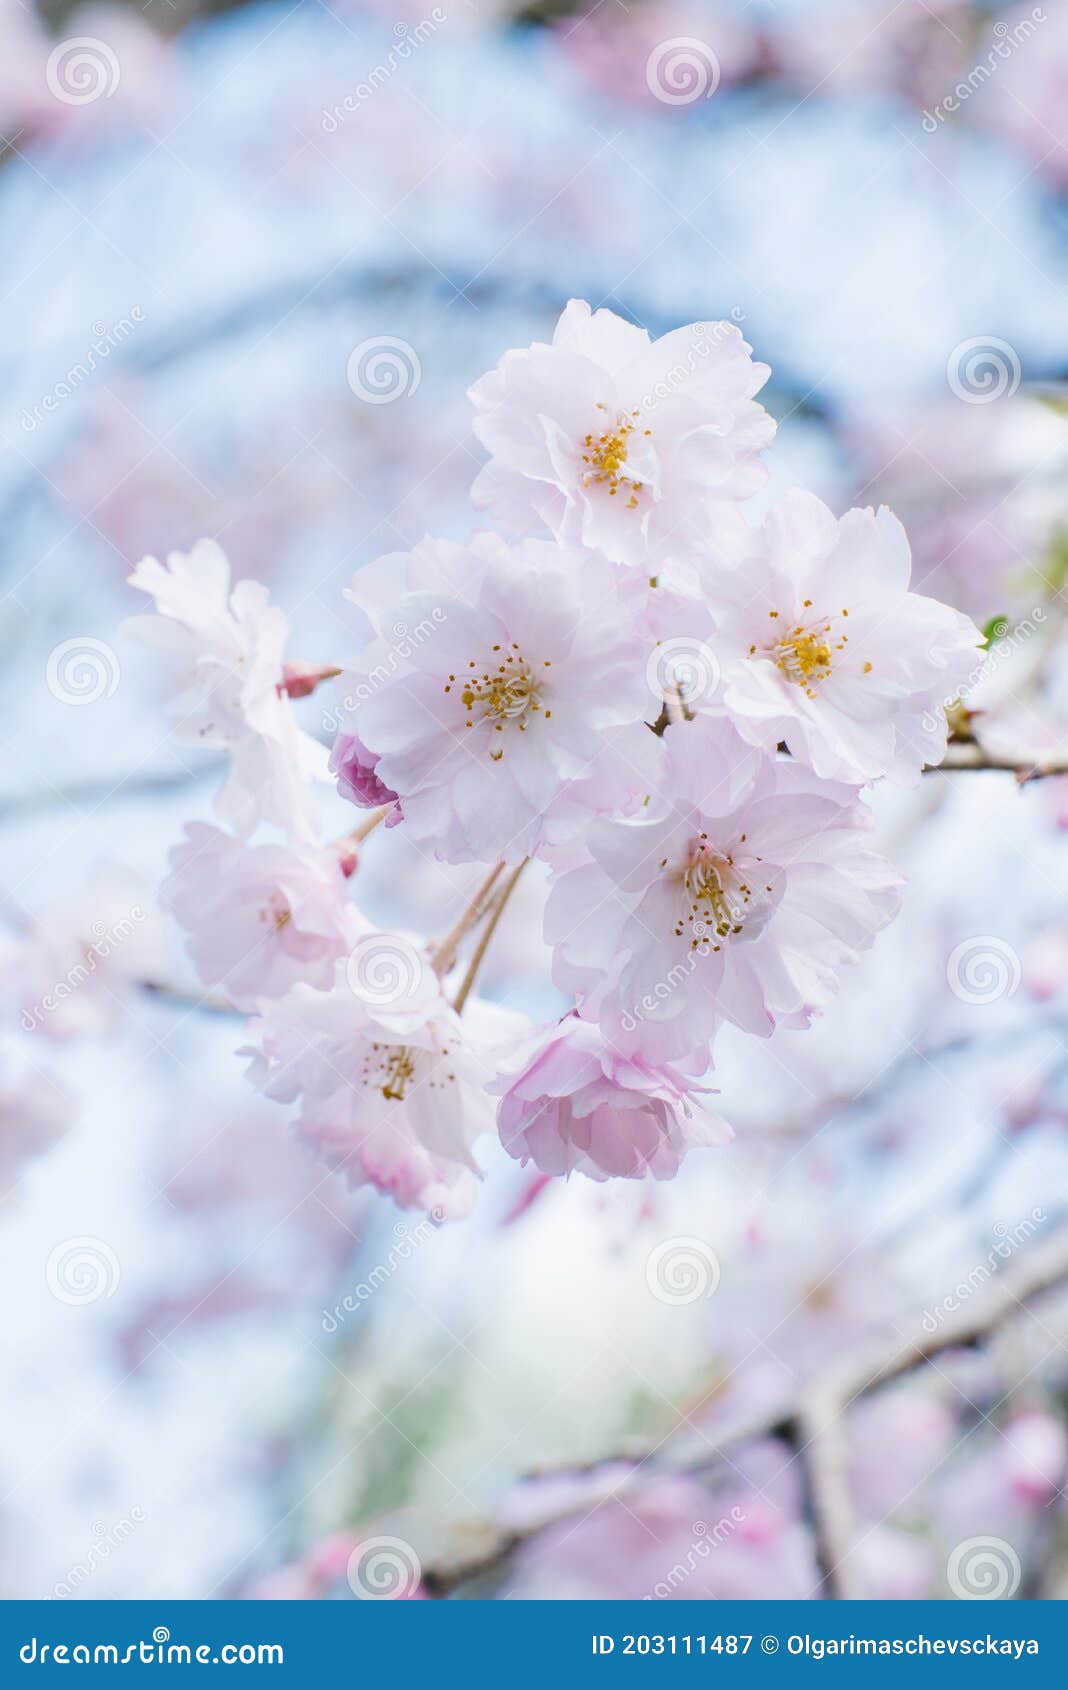 Cherry Blossoms in Full Bloom. Cherry Blossoms in Small Clusters on a ...